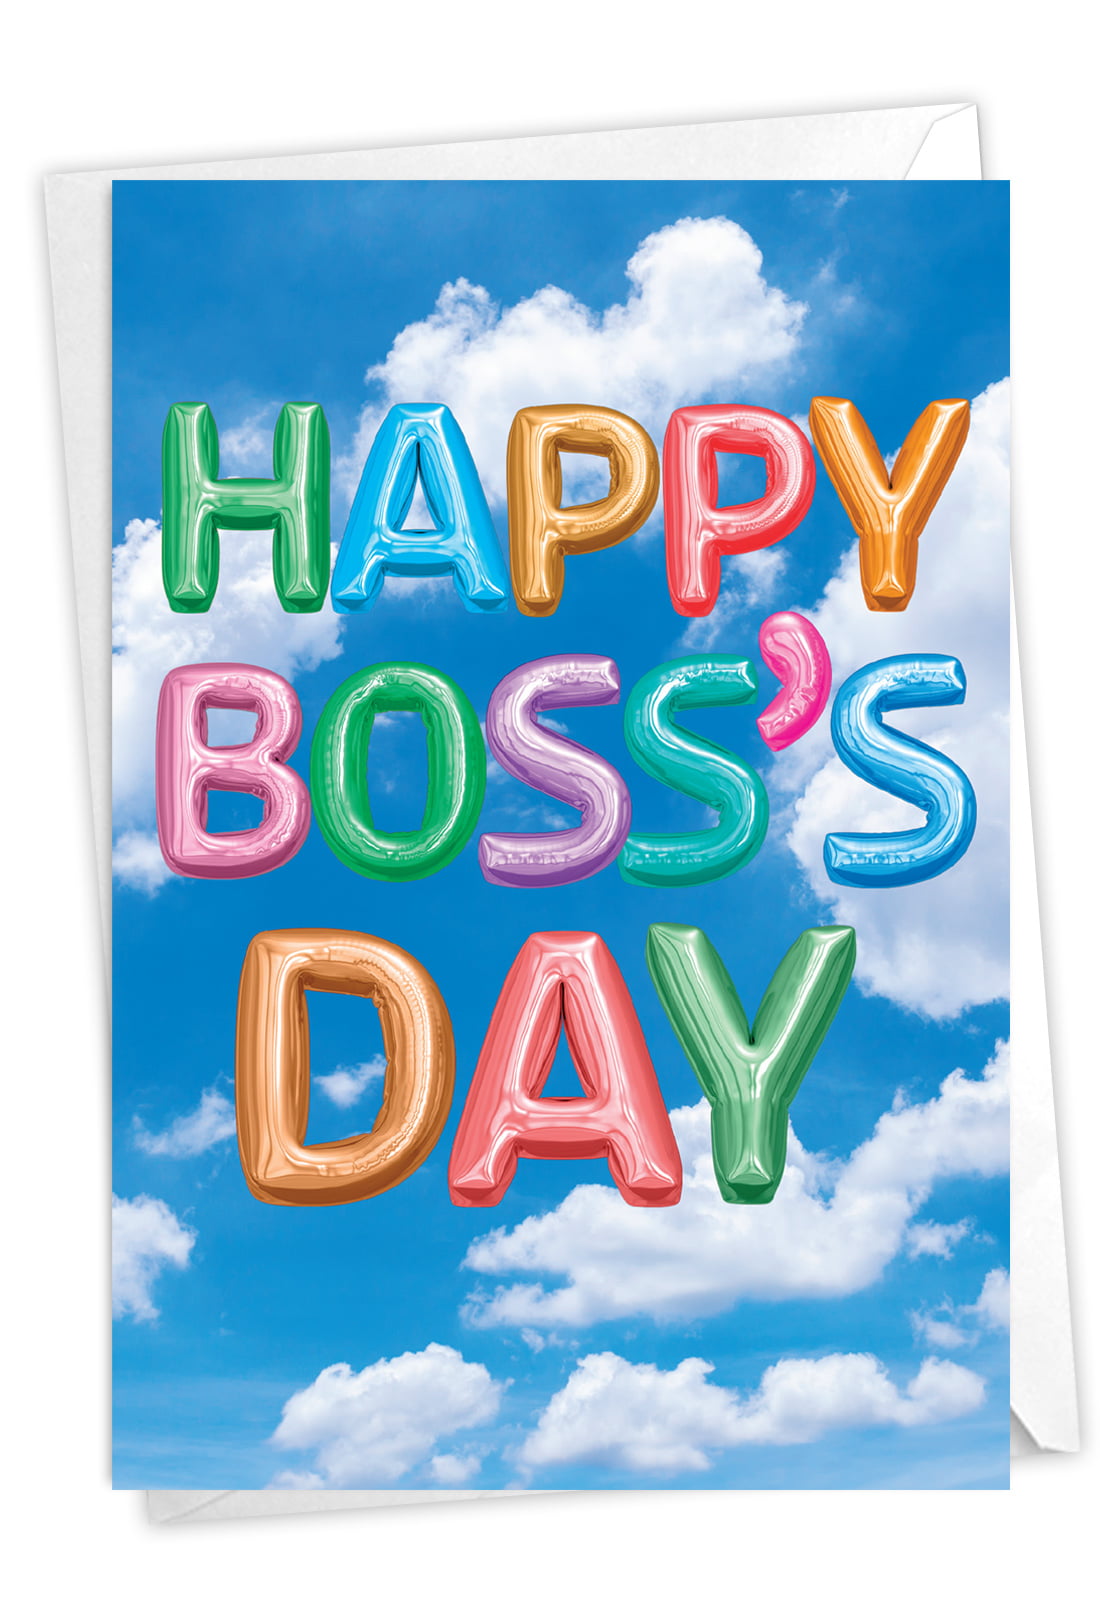 Happy Boss's Day Greeting Card - Notecard for Boss, Manager, Mentor ...